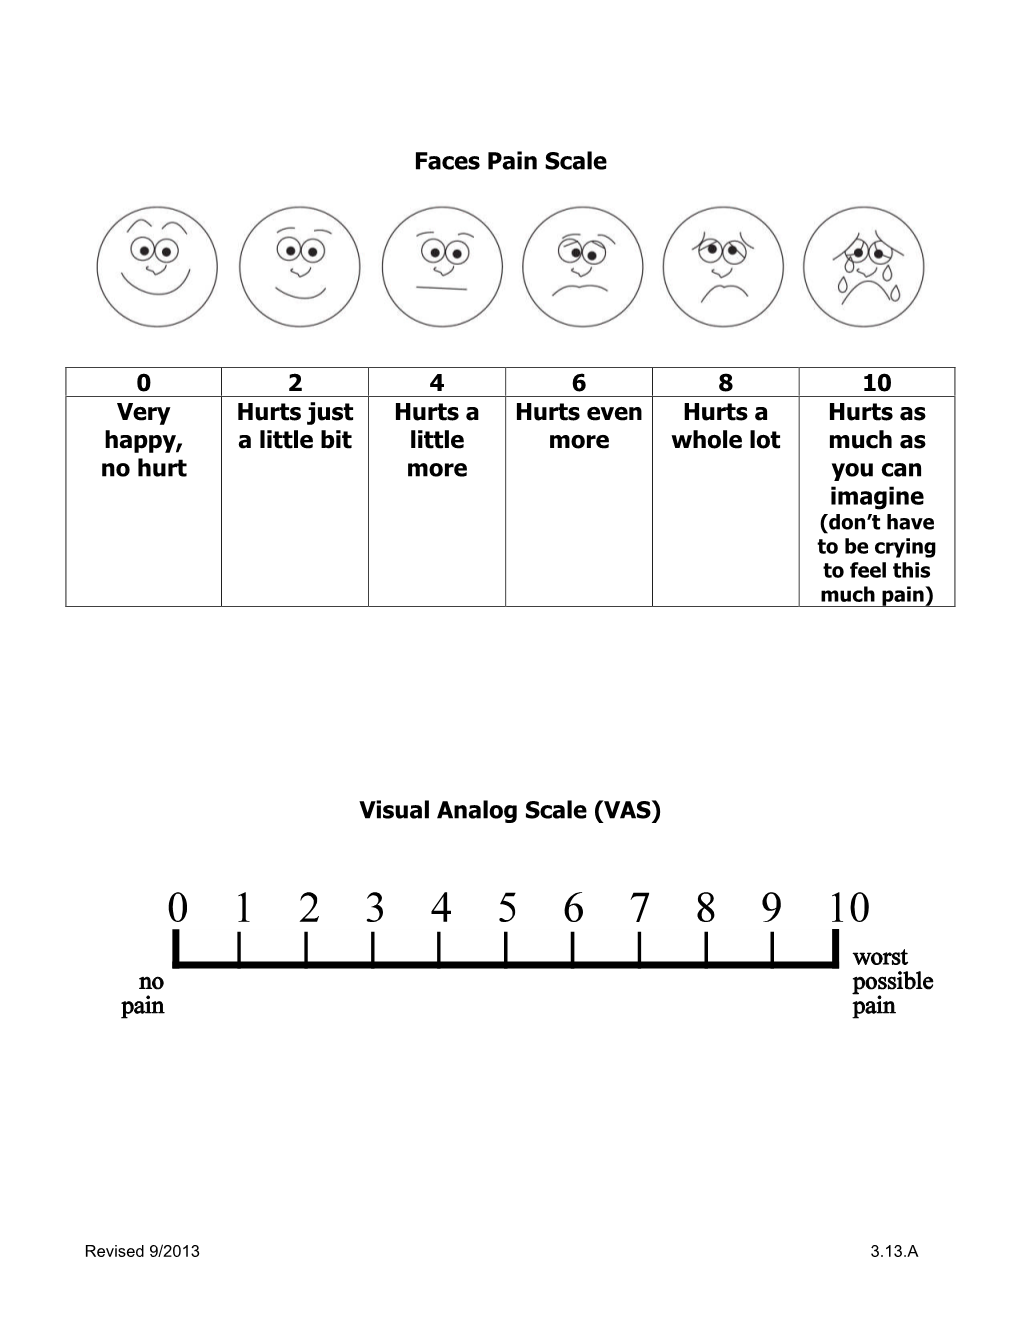 Faces Pain Scale Visual Analog Scale